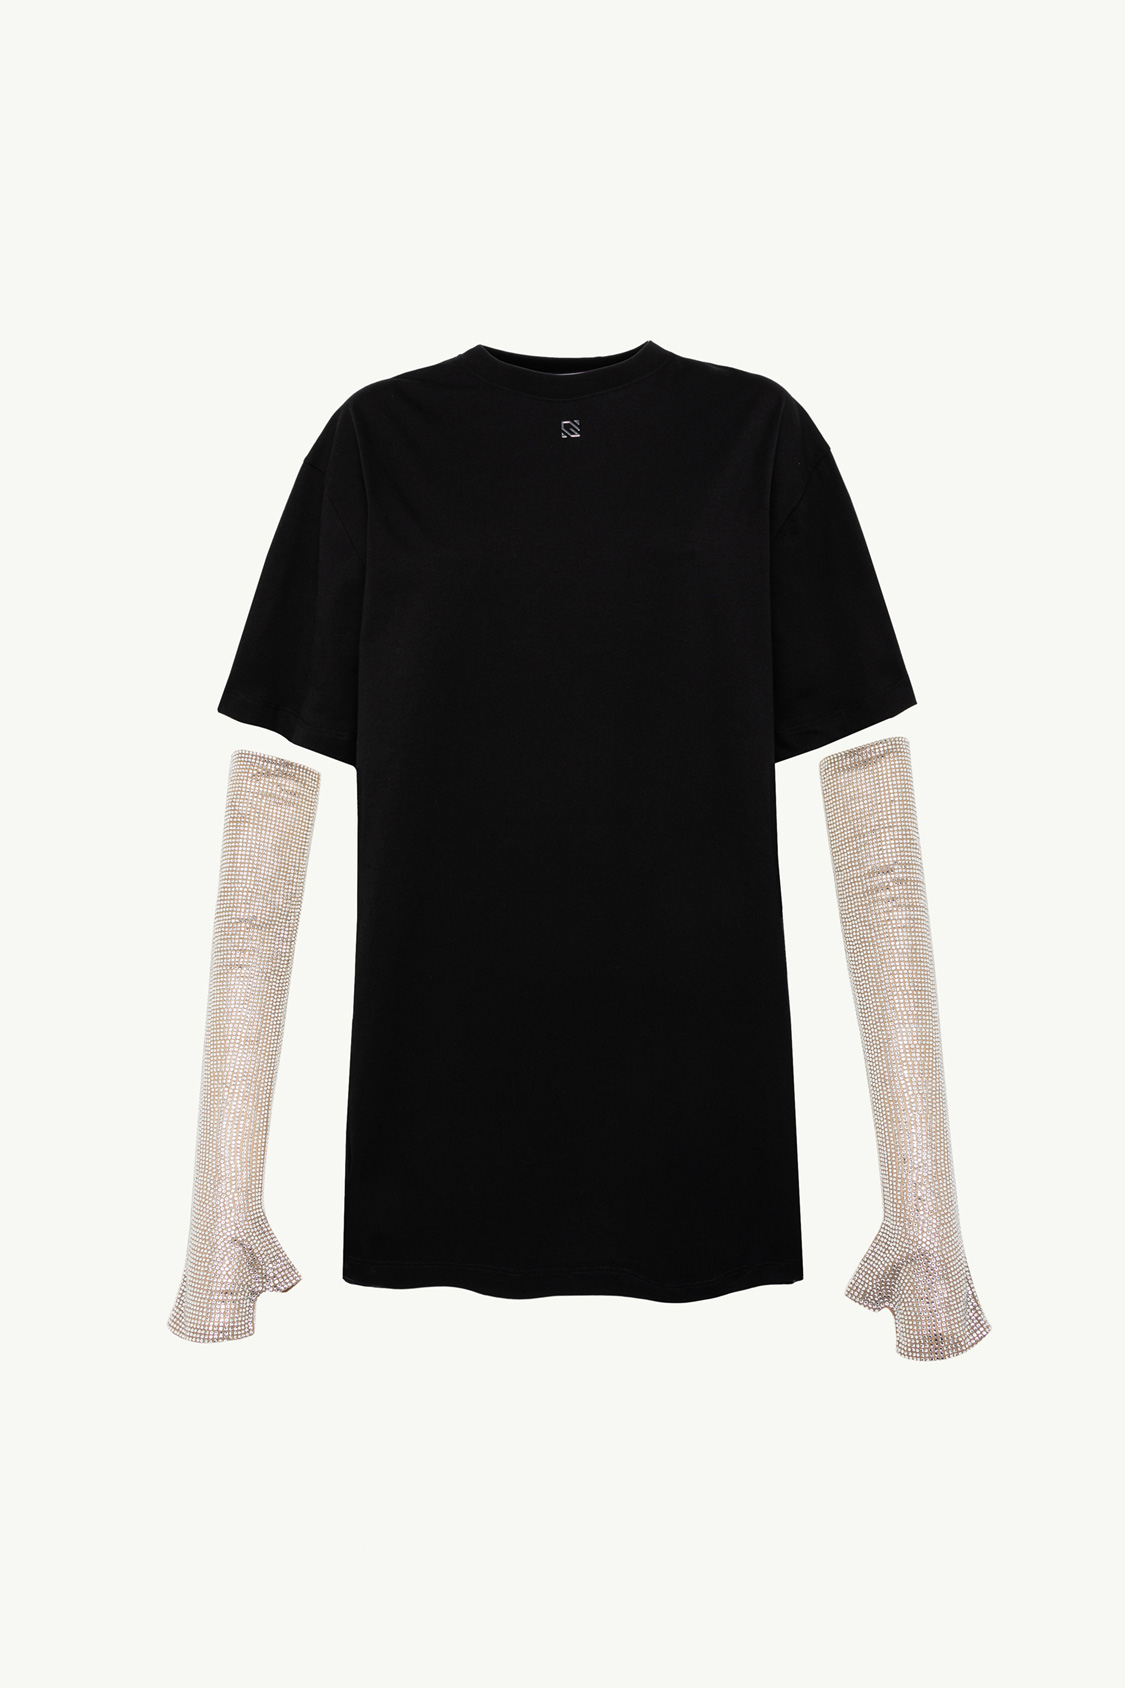 T-SHIRT DRESS IN JERSEY WITH RHINESTONE-COVERED GLOVES